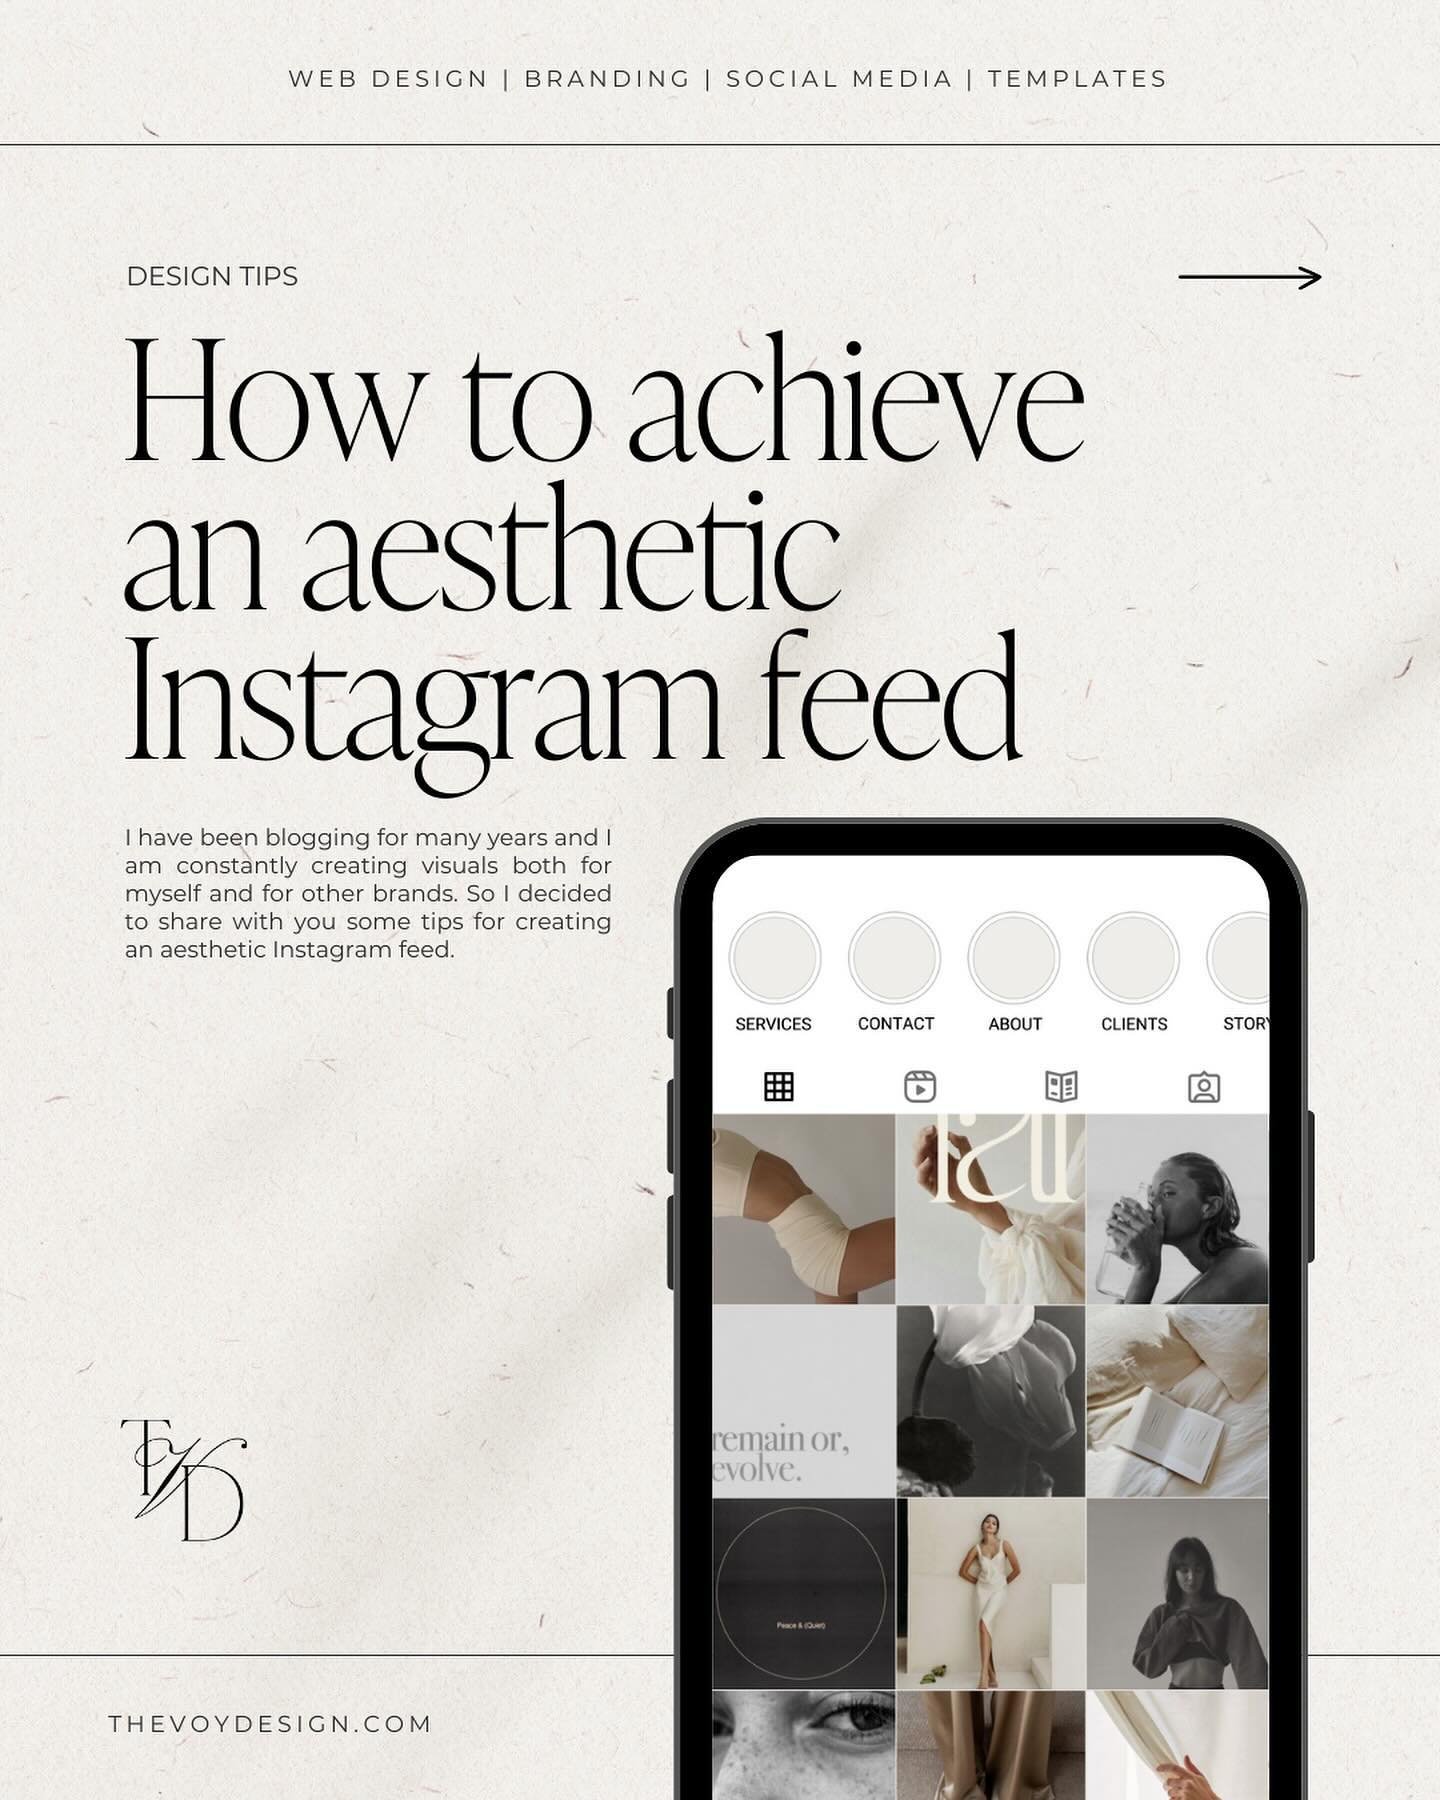 Why do you need to have a beautiful Instagram feed? You don&rsquo;t &ldquo;need&rdquo; it! But, a beautiful and meaningful feed can help you to share your vision with the right audience, create a community and increase credibility. 

An aesthetic Ins